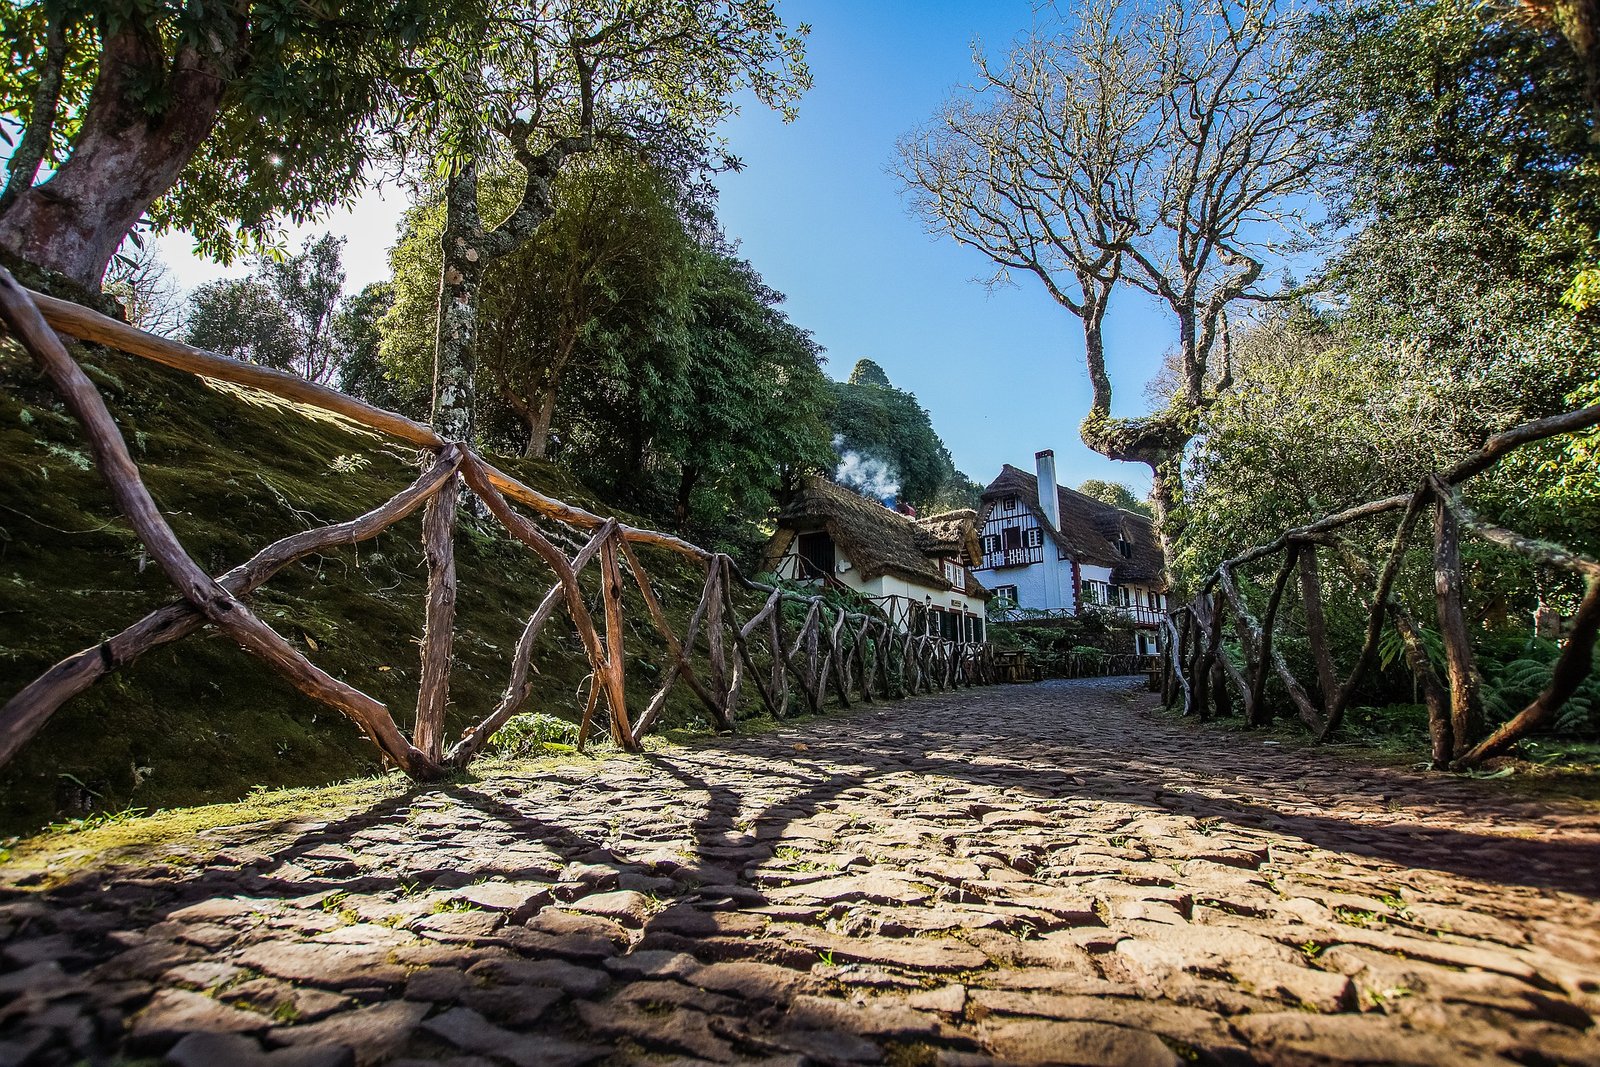 Travel Tips to Visit the Outstanding island of Madeira